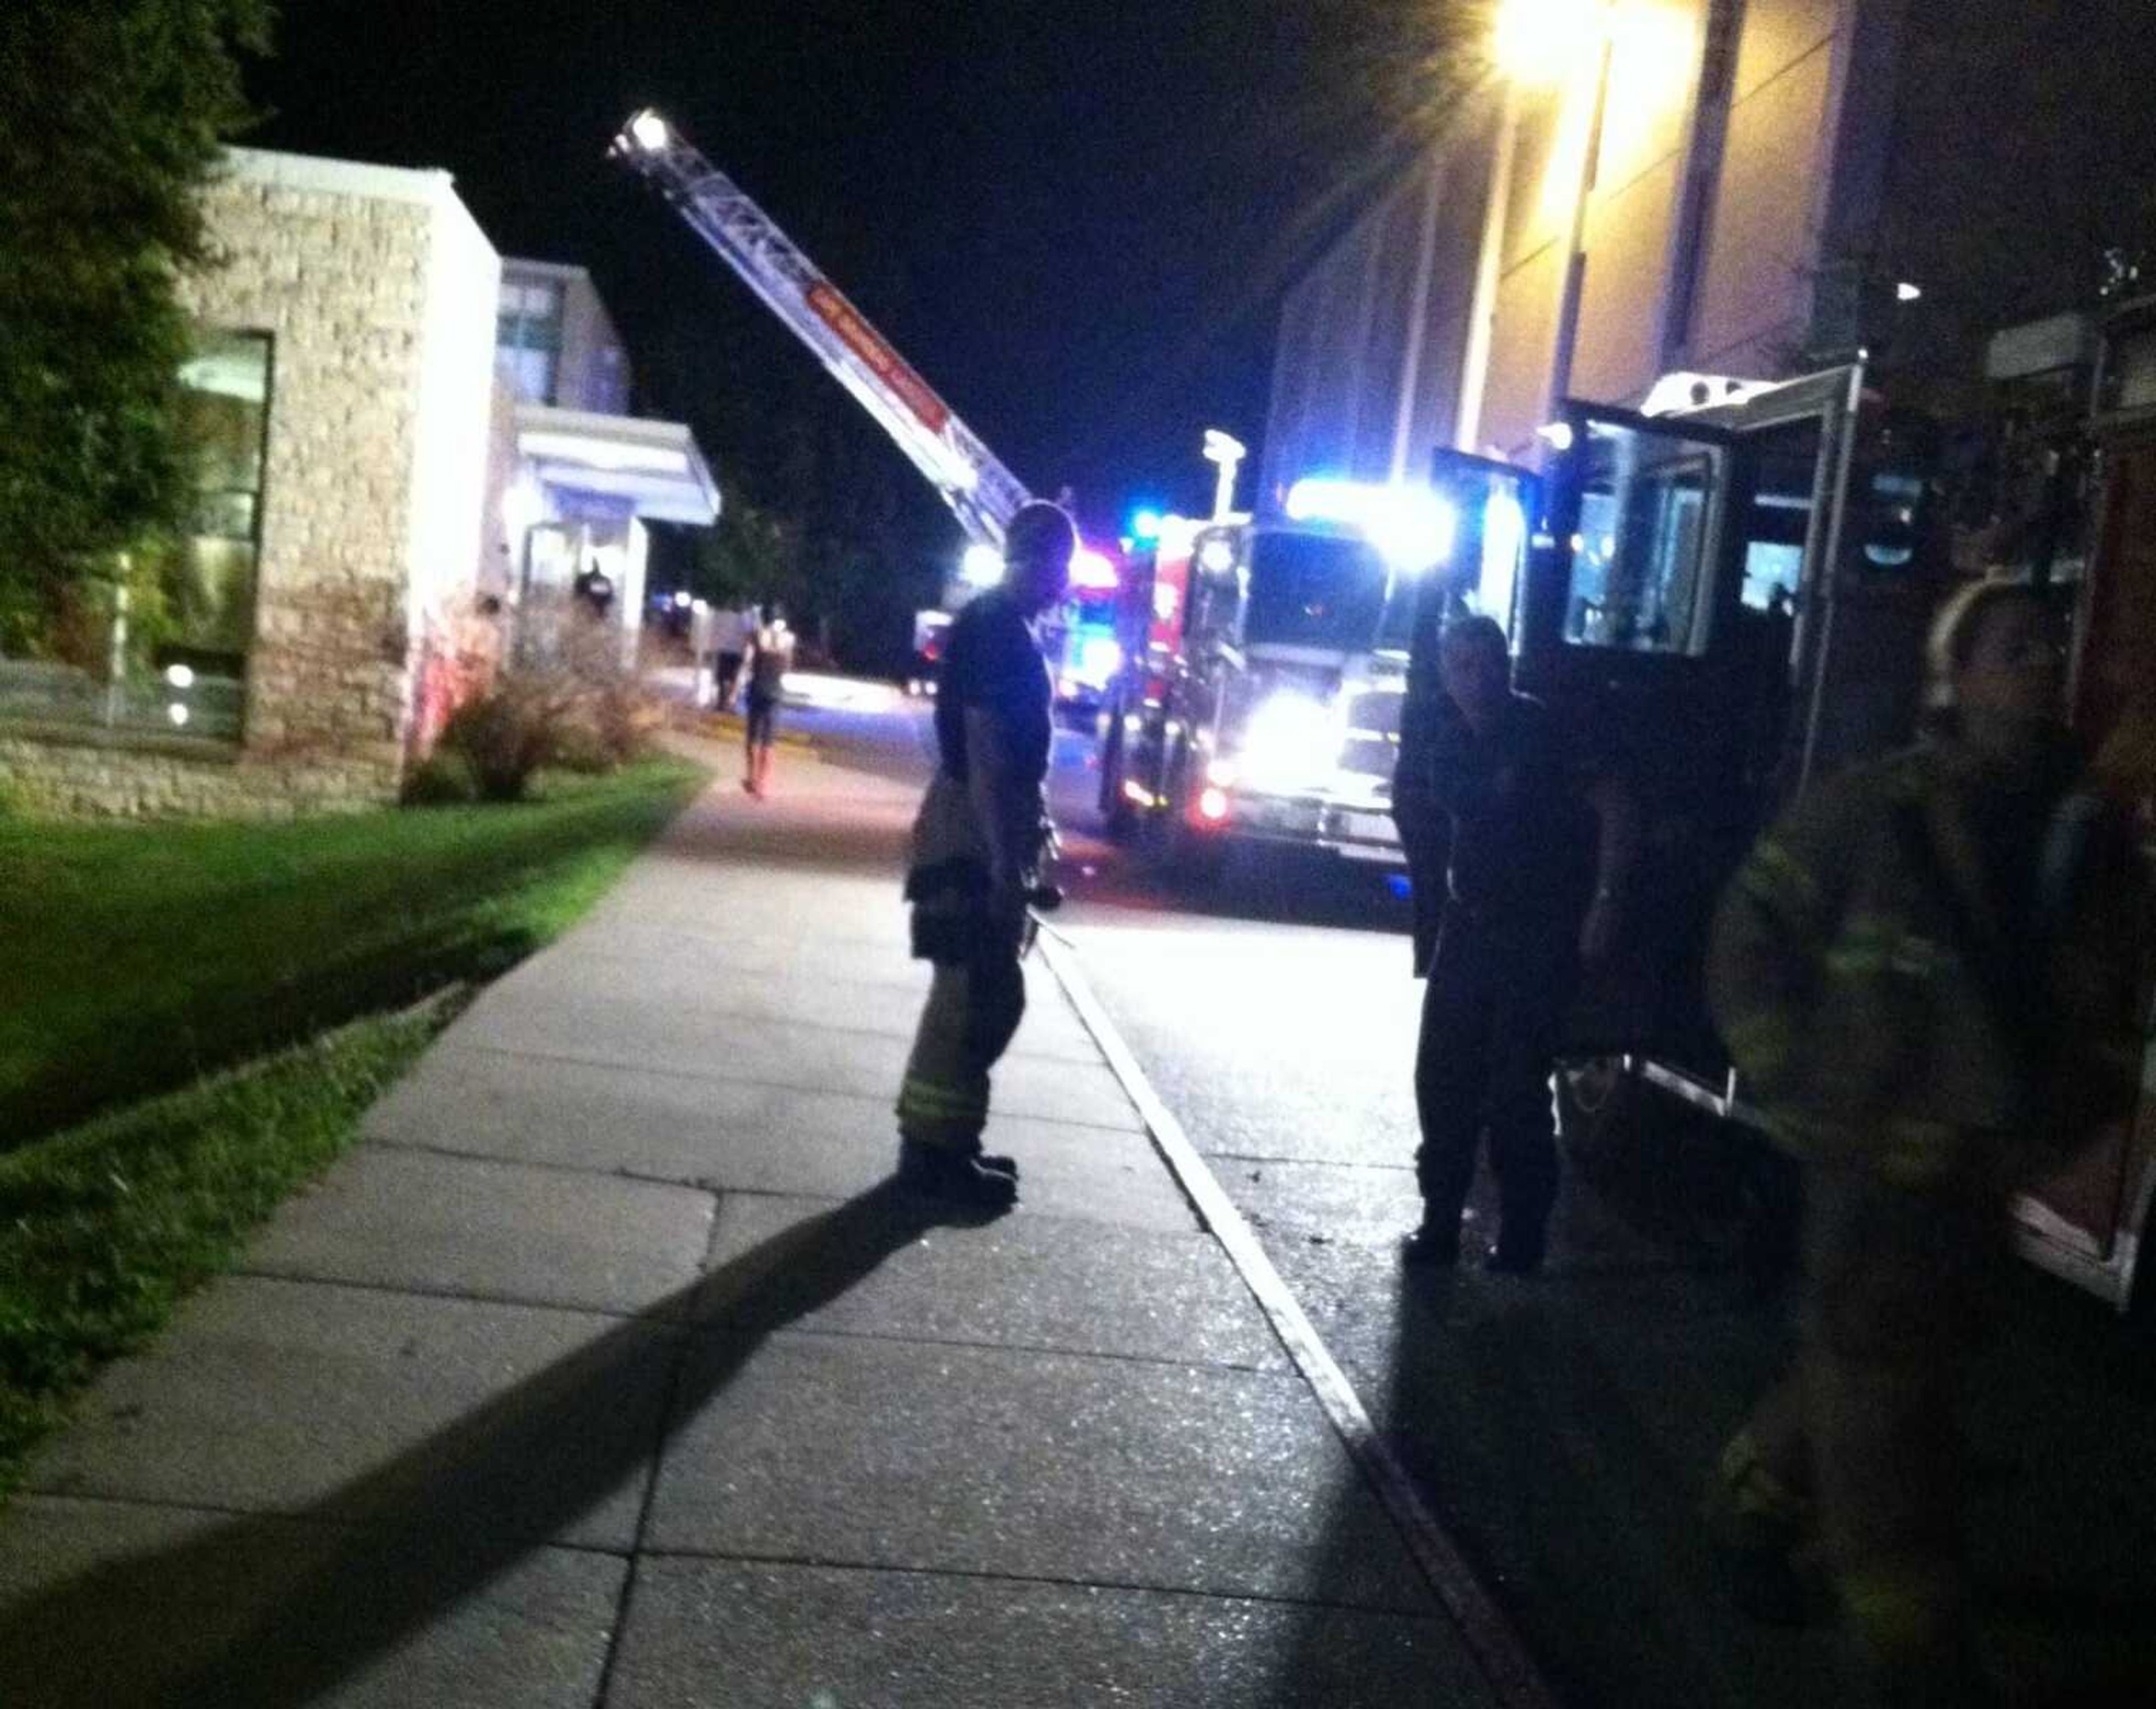 Fire department called to Dearmont Hall late Friday night